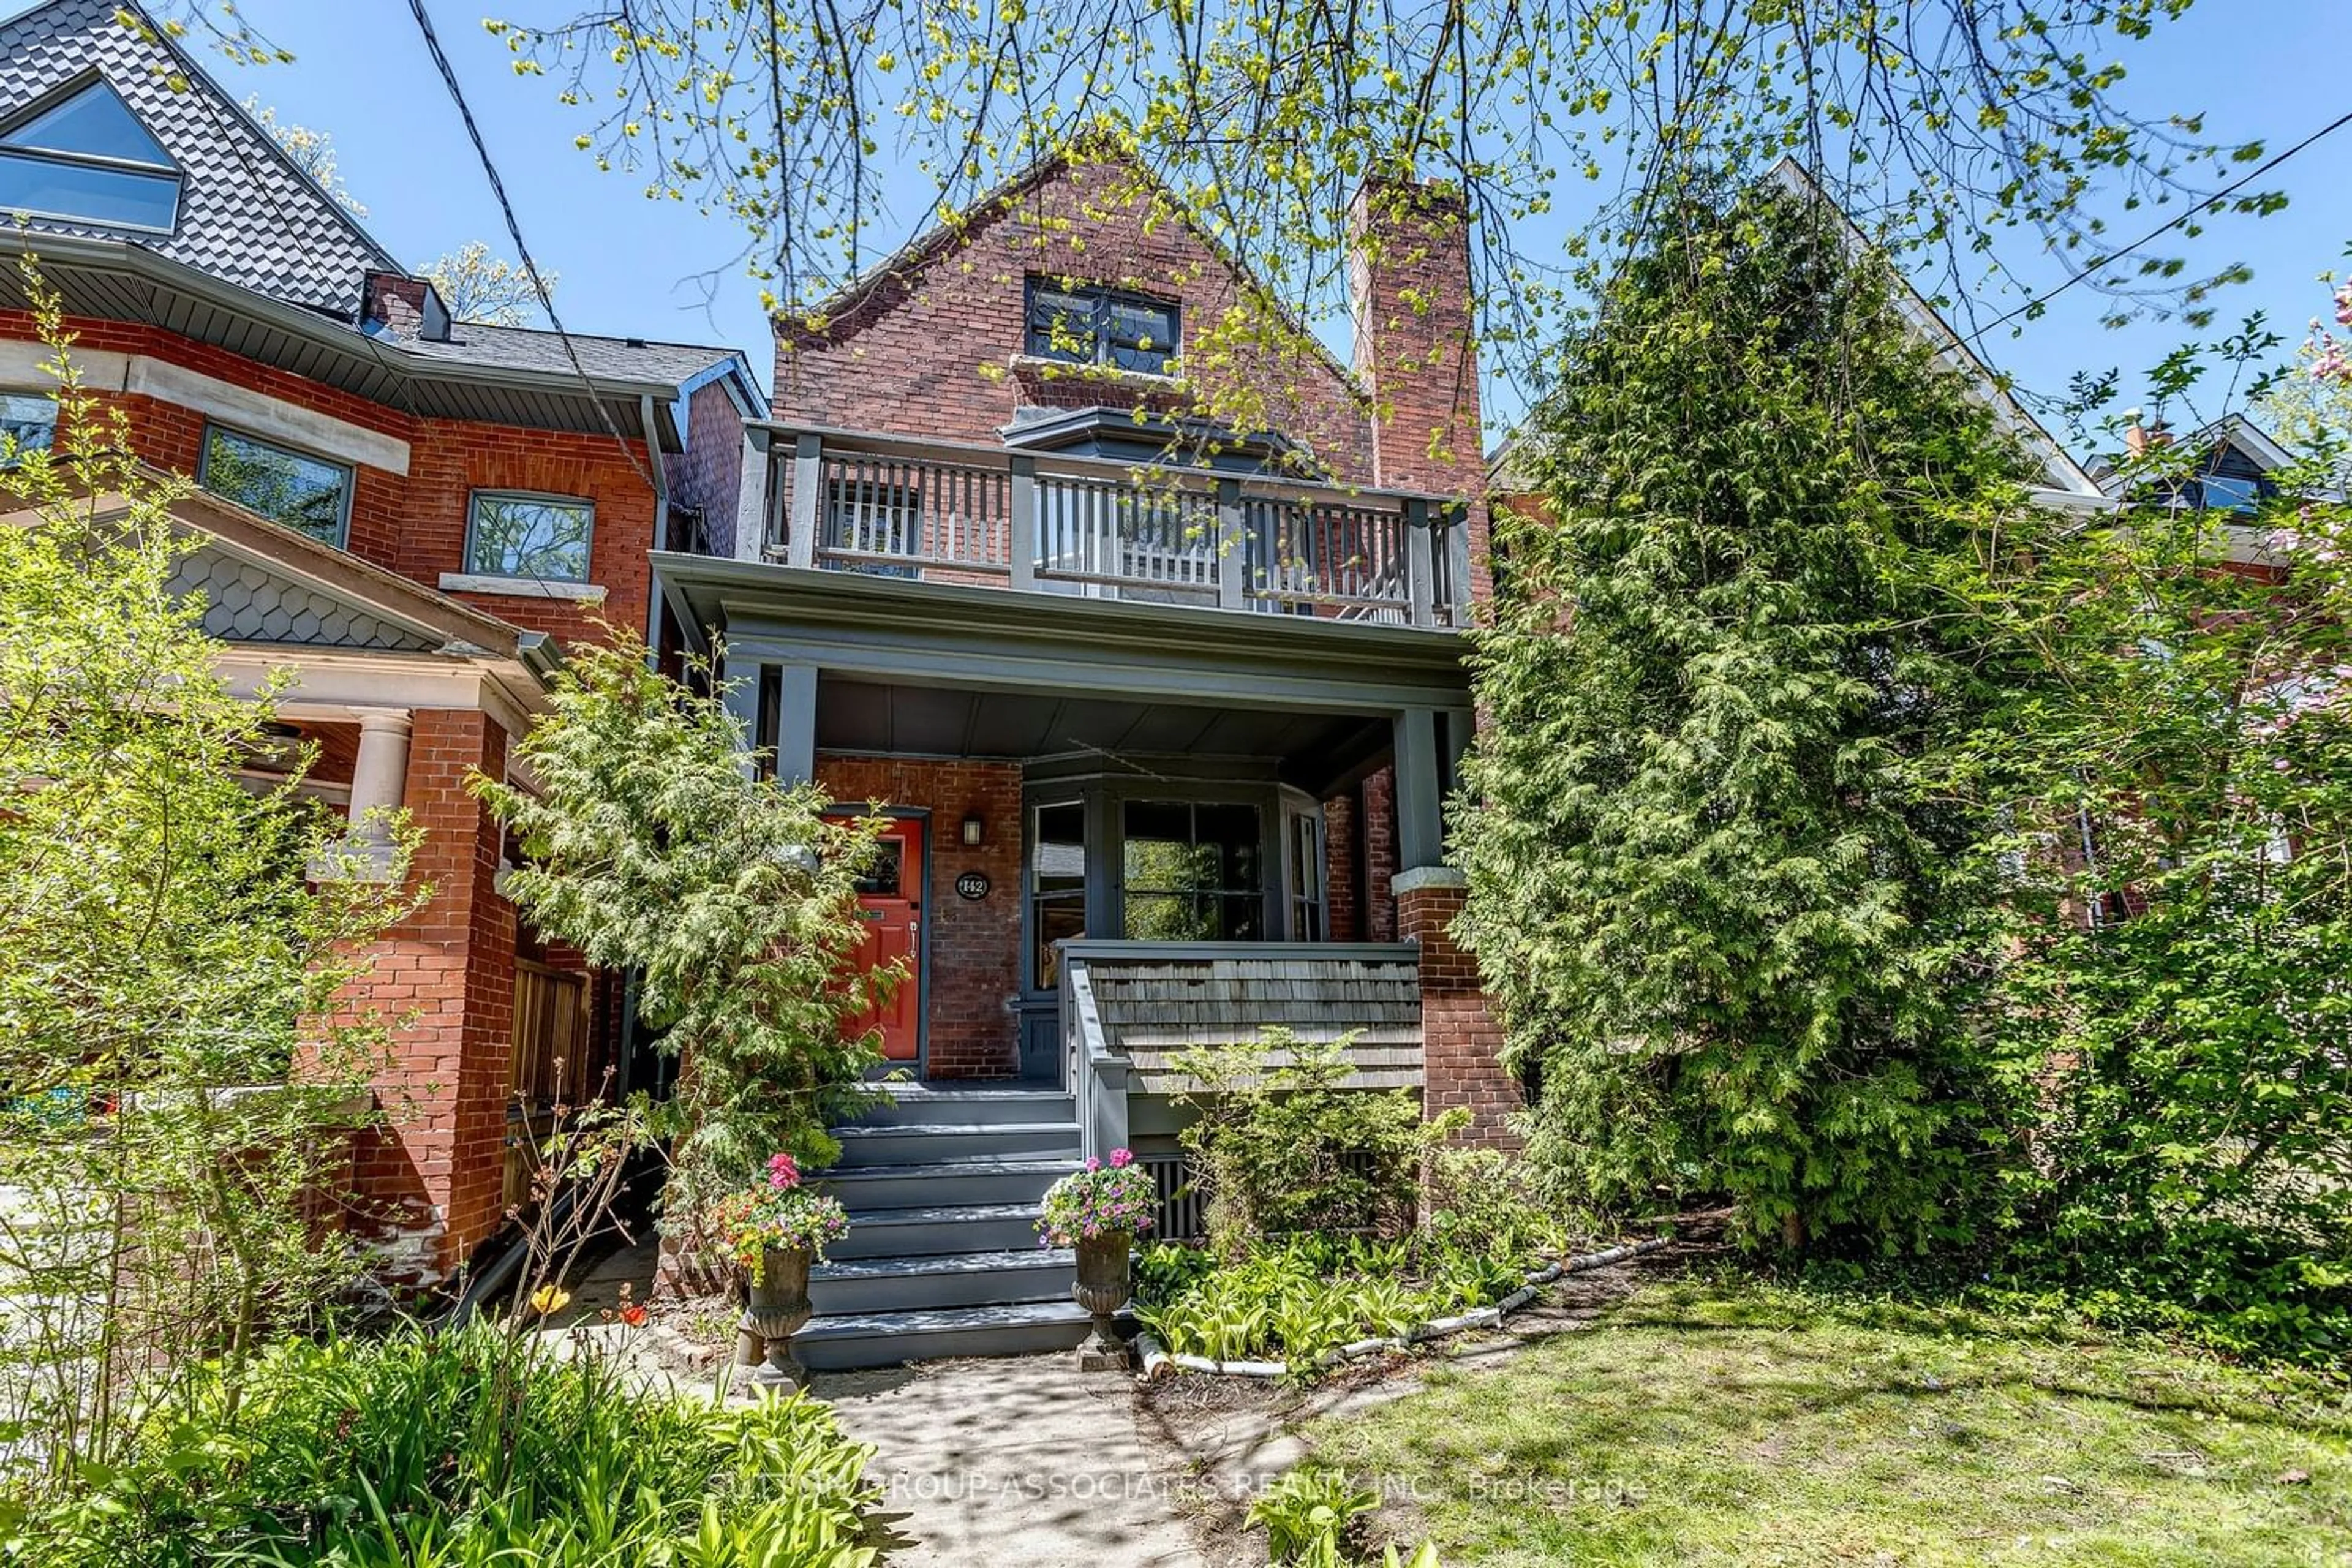 Home with brick exterior material for 142 Glendale Ave, Toronto Ontario M6R 2T2